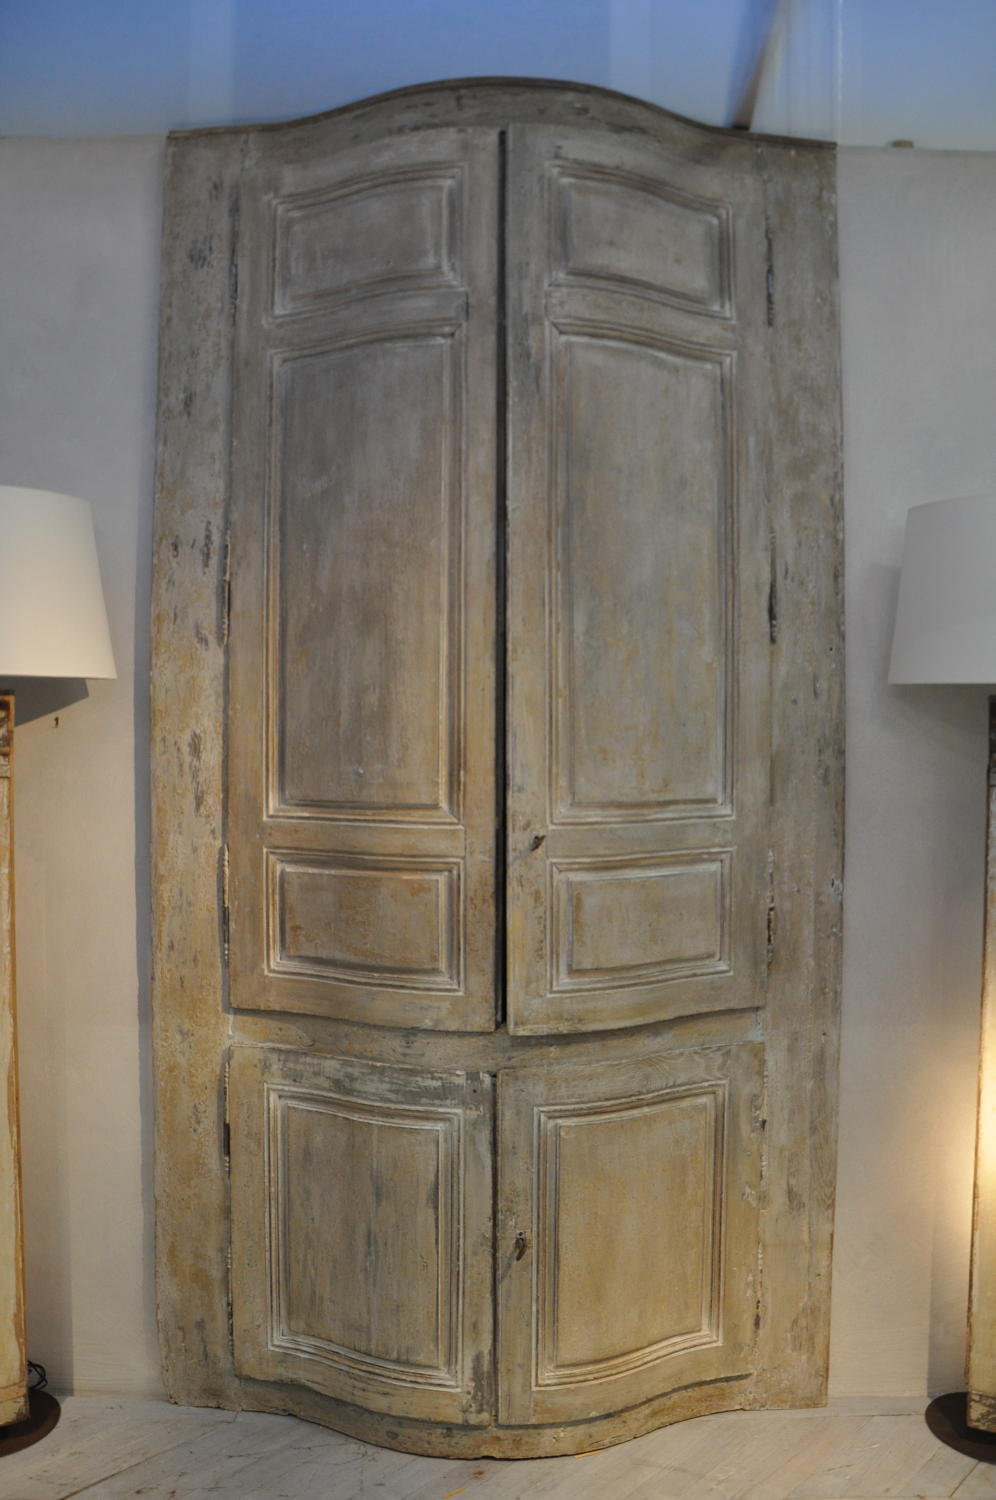 A pair of French 18th century doors with orig